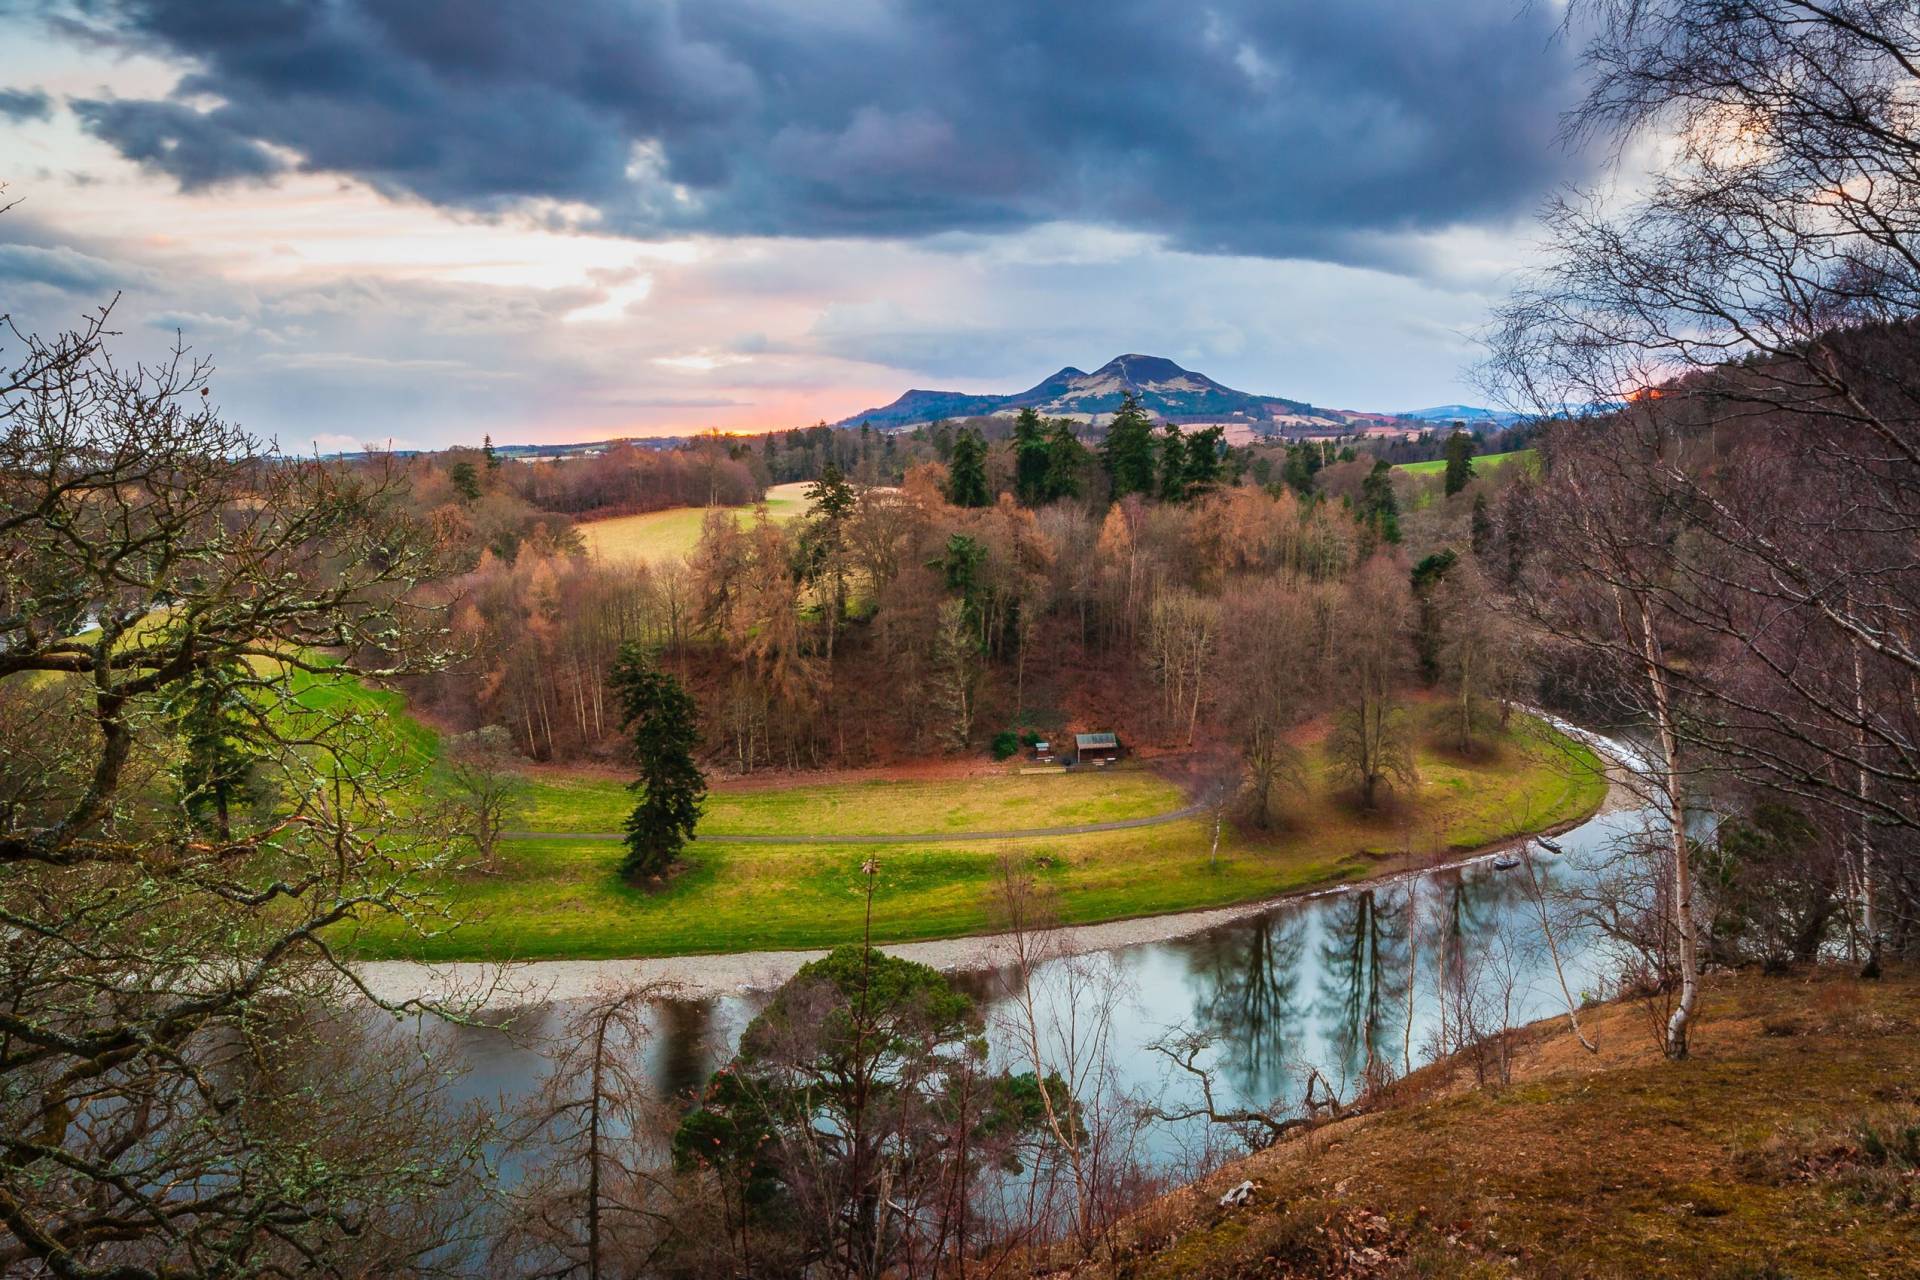 The River Tweed and the Eildon Hills from Scott's View, The Borders, Scotland.